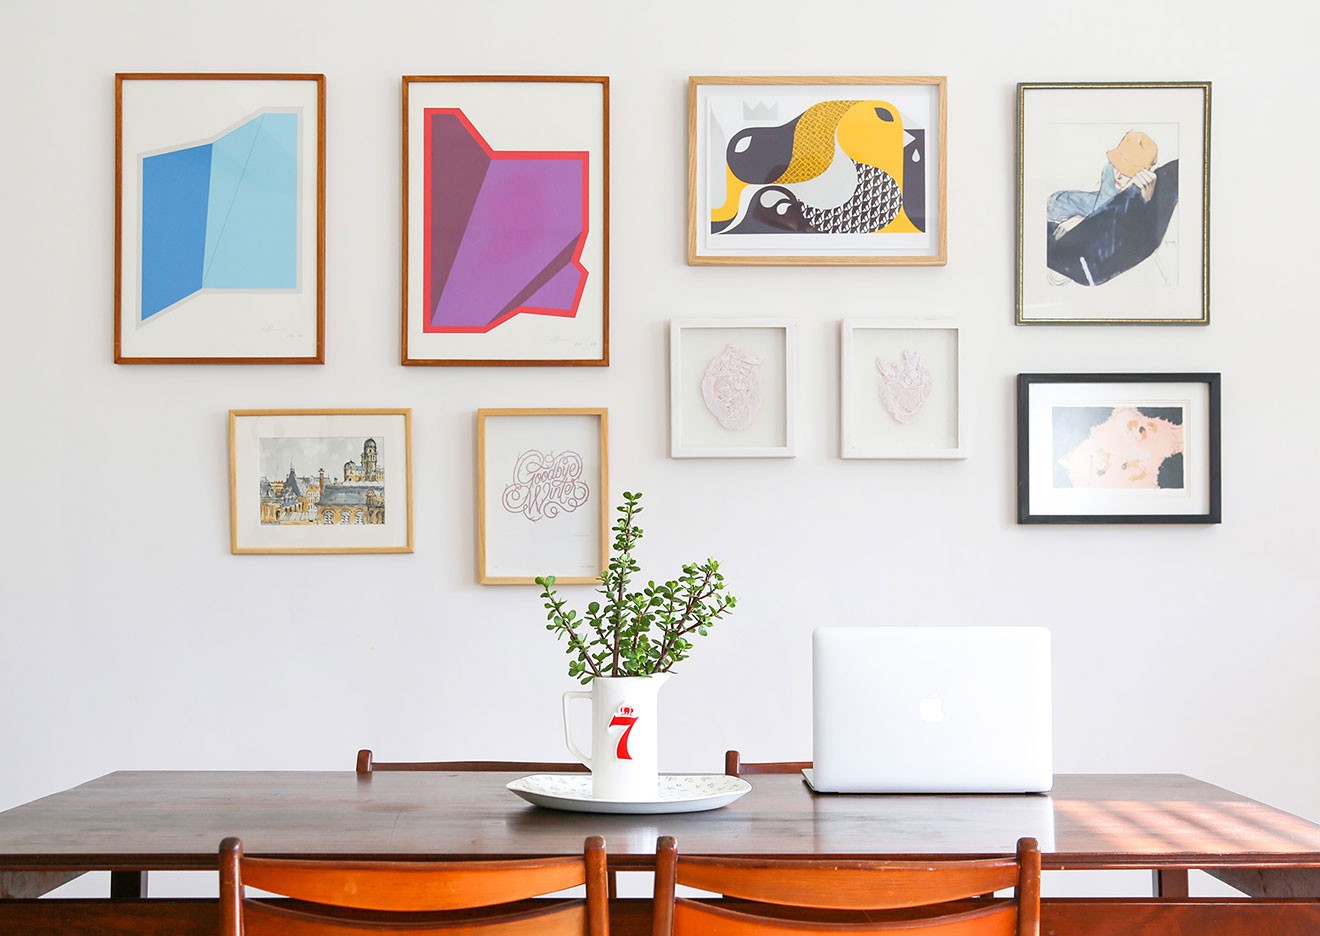 These Walls // Miss Moss shares bits of her apartment